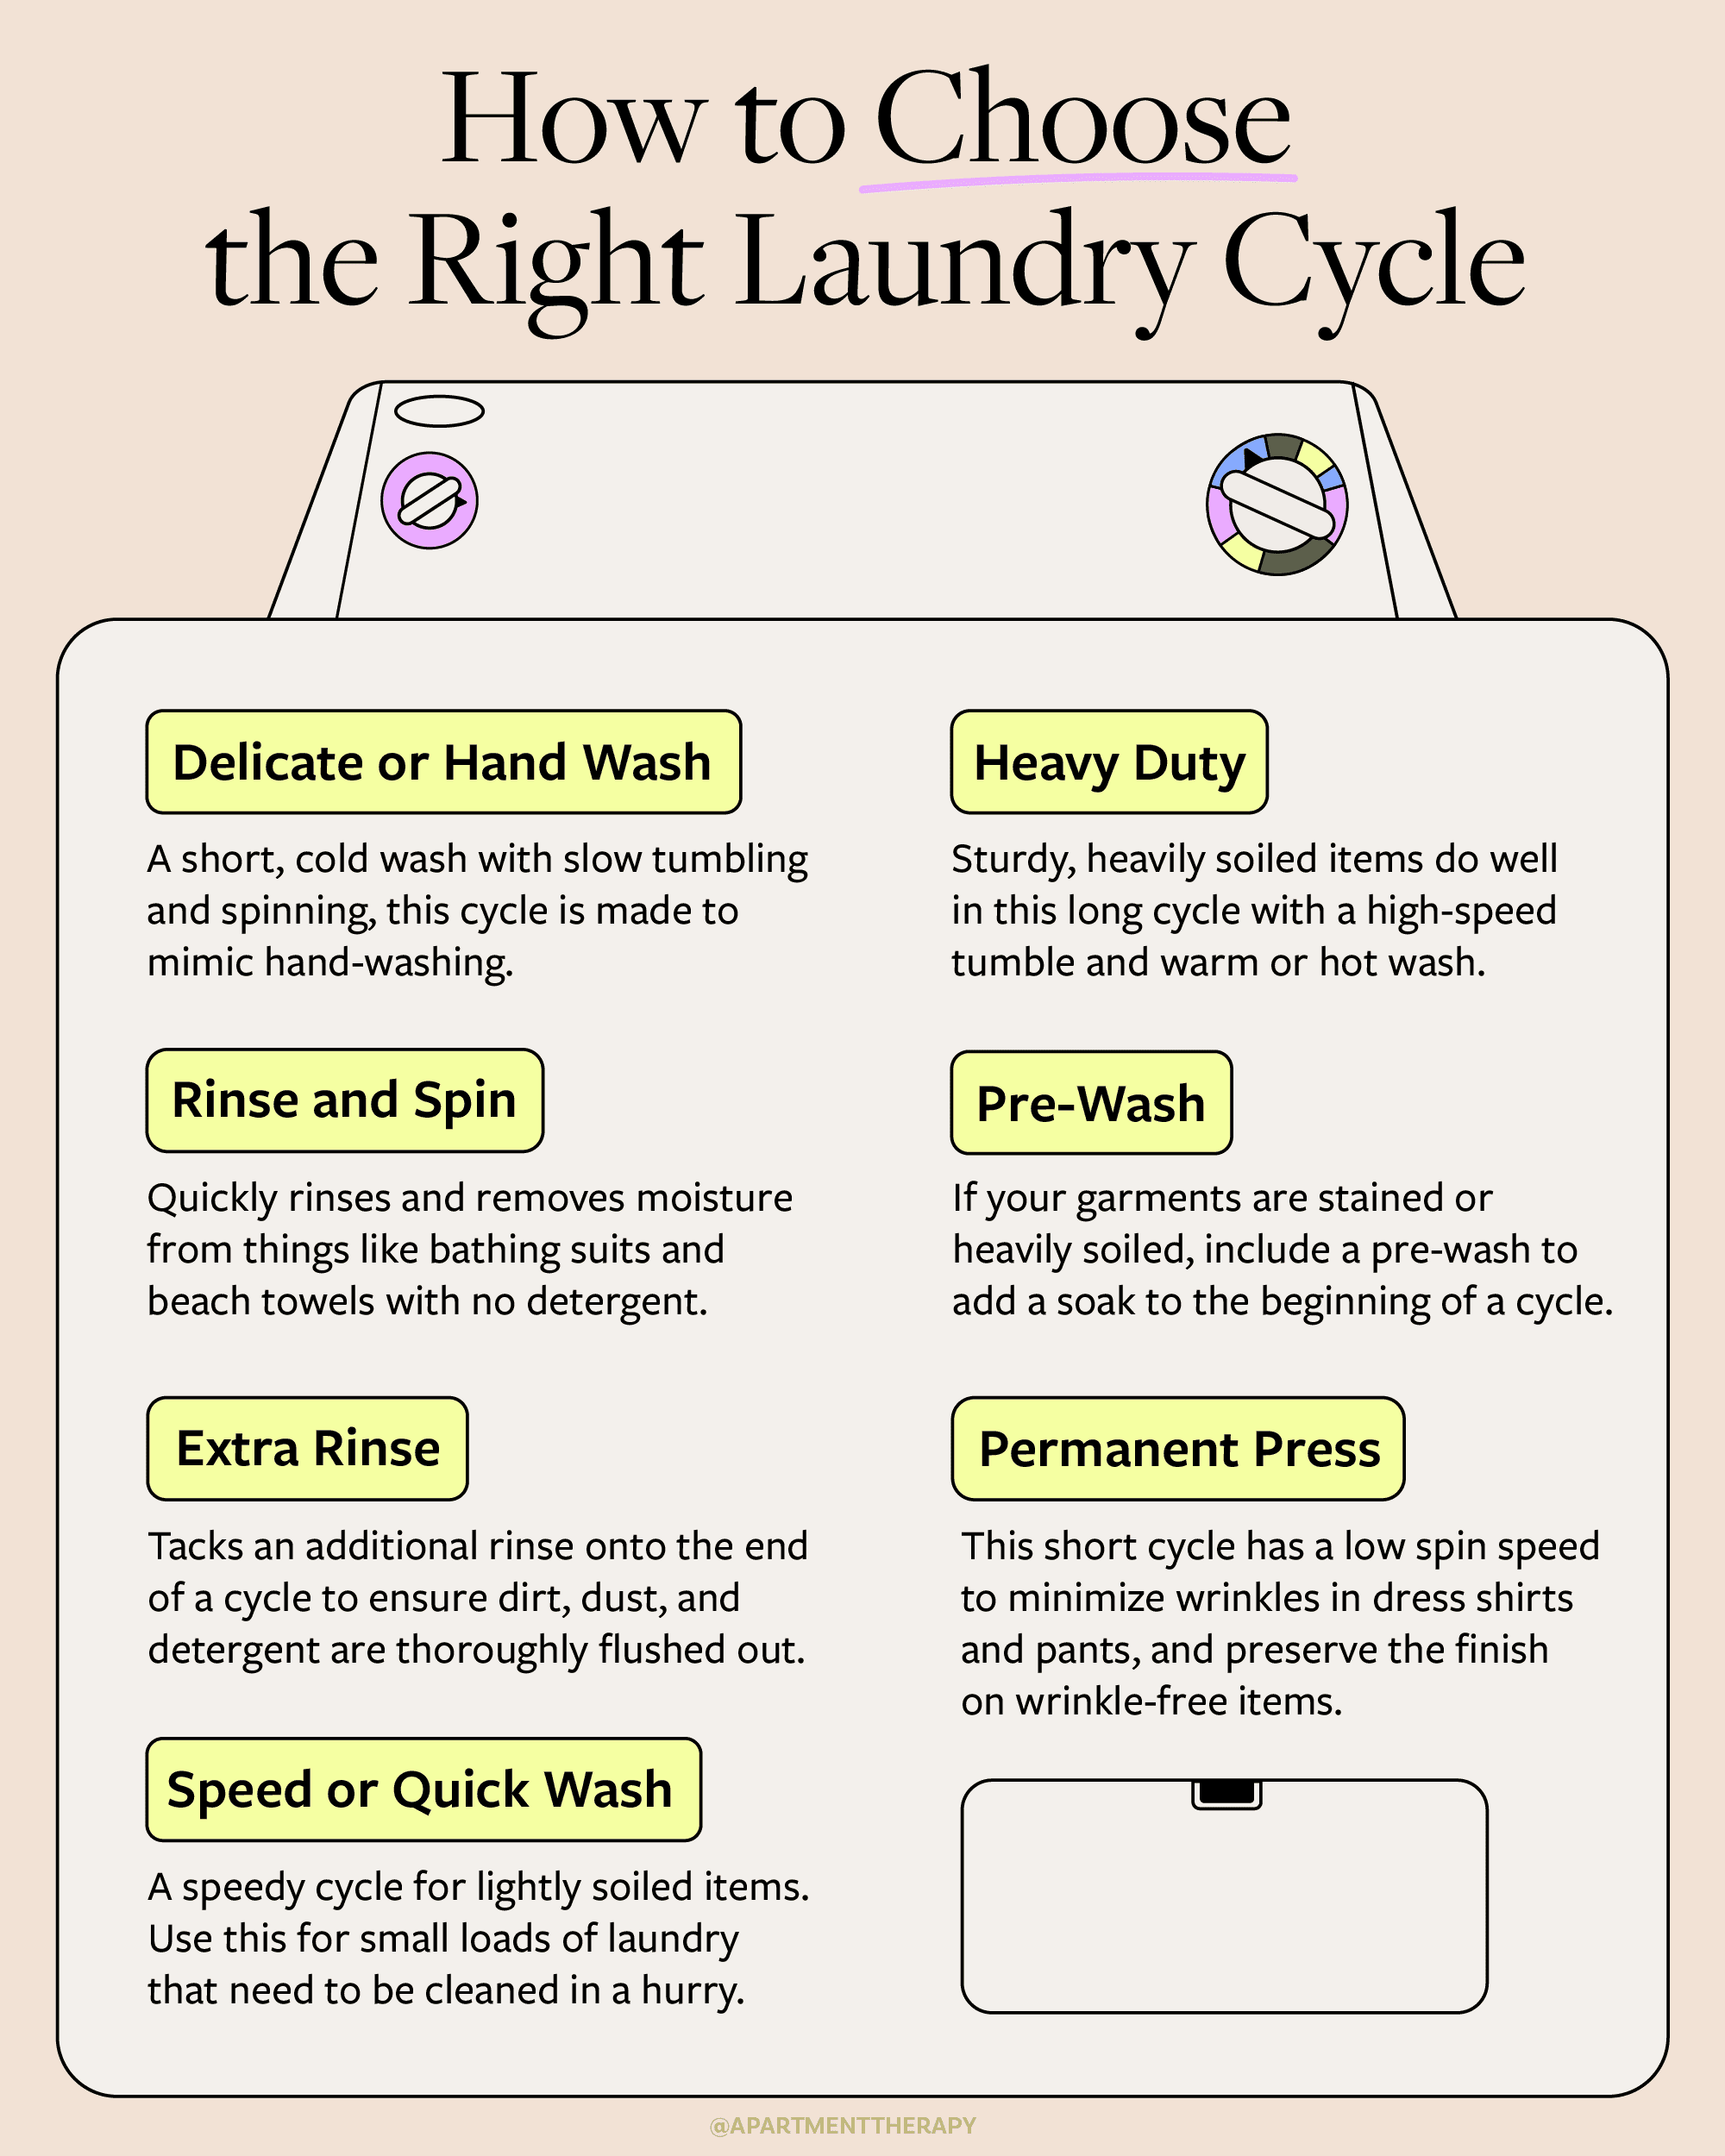 How to Use the Quick Wash Setting on Your Washing Machine